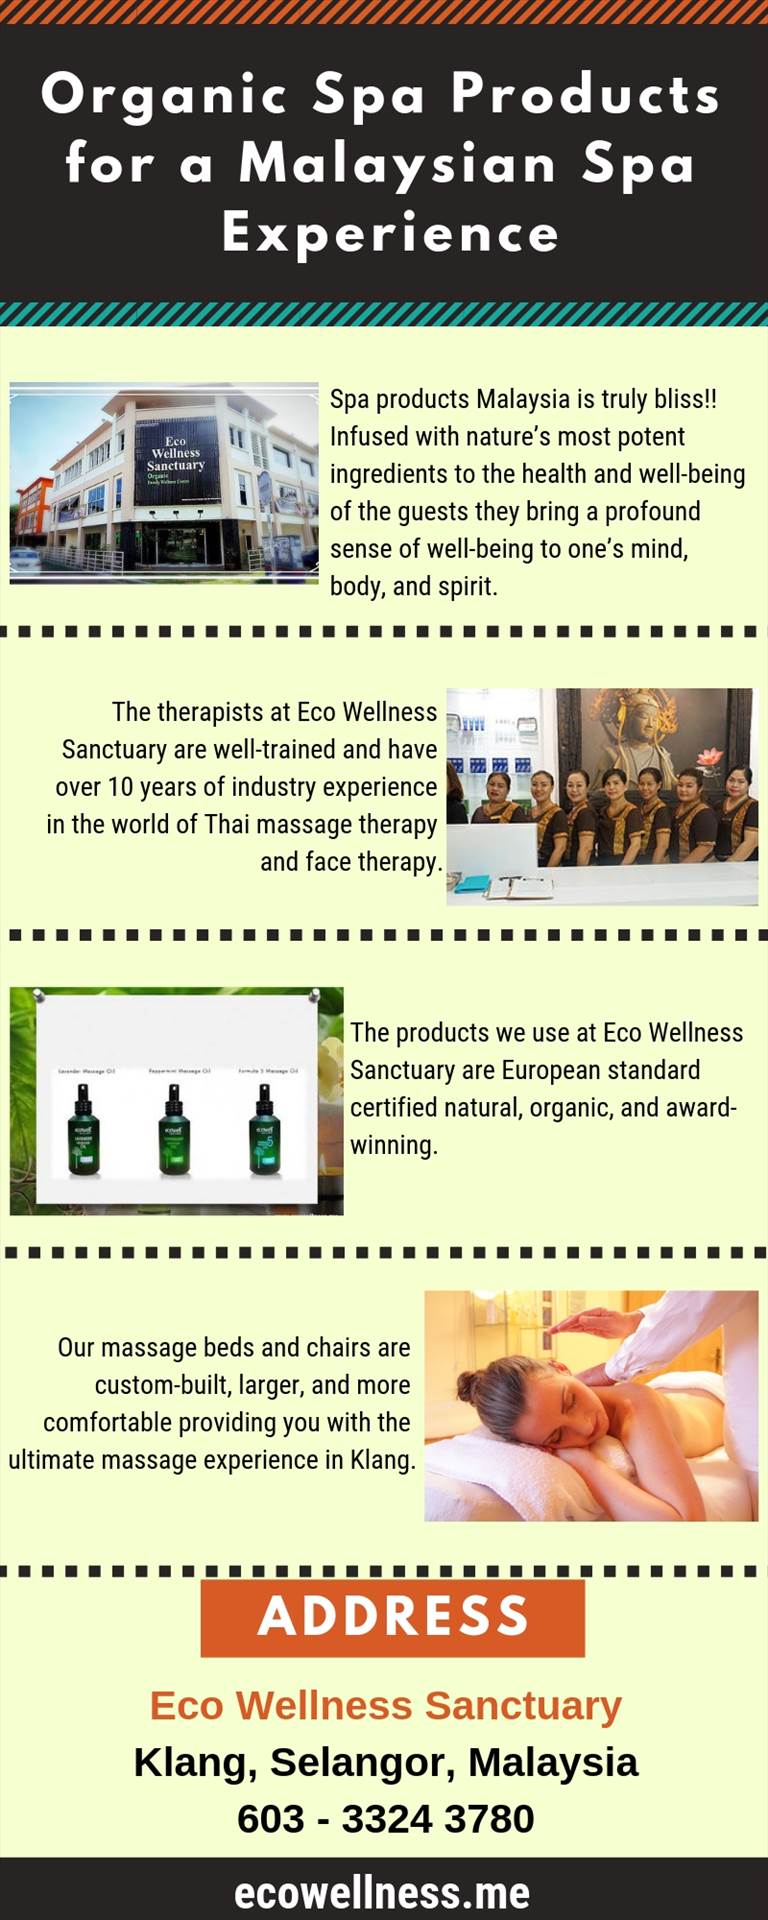 Organic Spa Products for a Malaysian Spa Experience.jpg  by ecowellness15